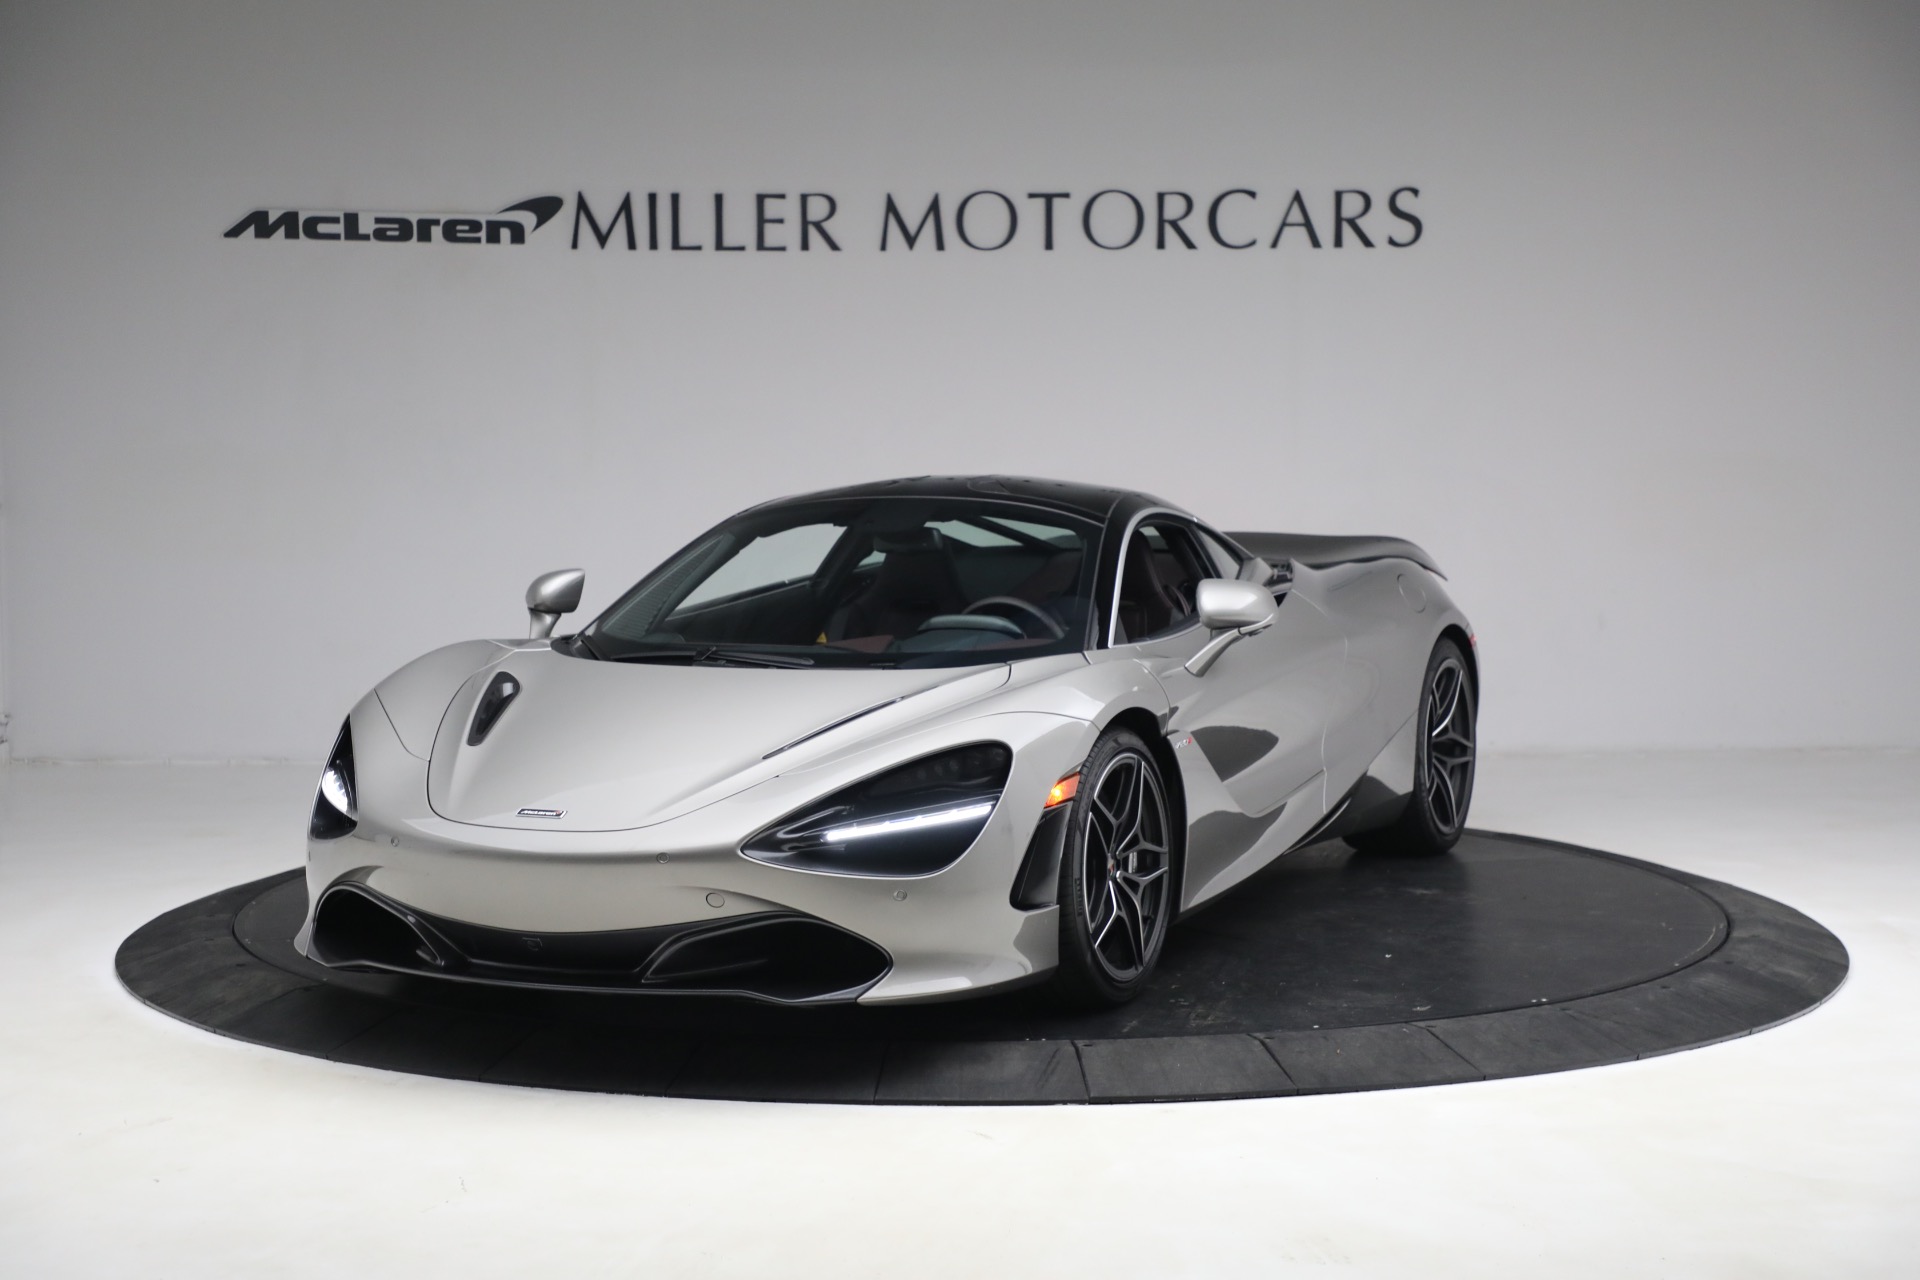 Used 2018 McLaren 720S Luxury for sale $264,900 at Bentley Greenwich in Greenwich CT 06830 1